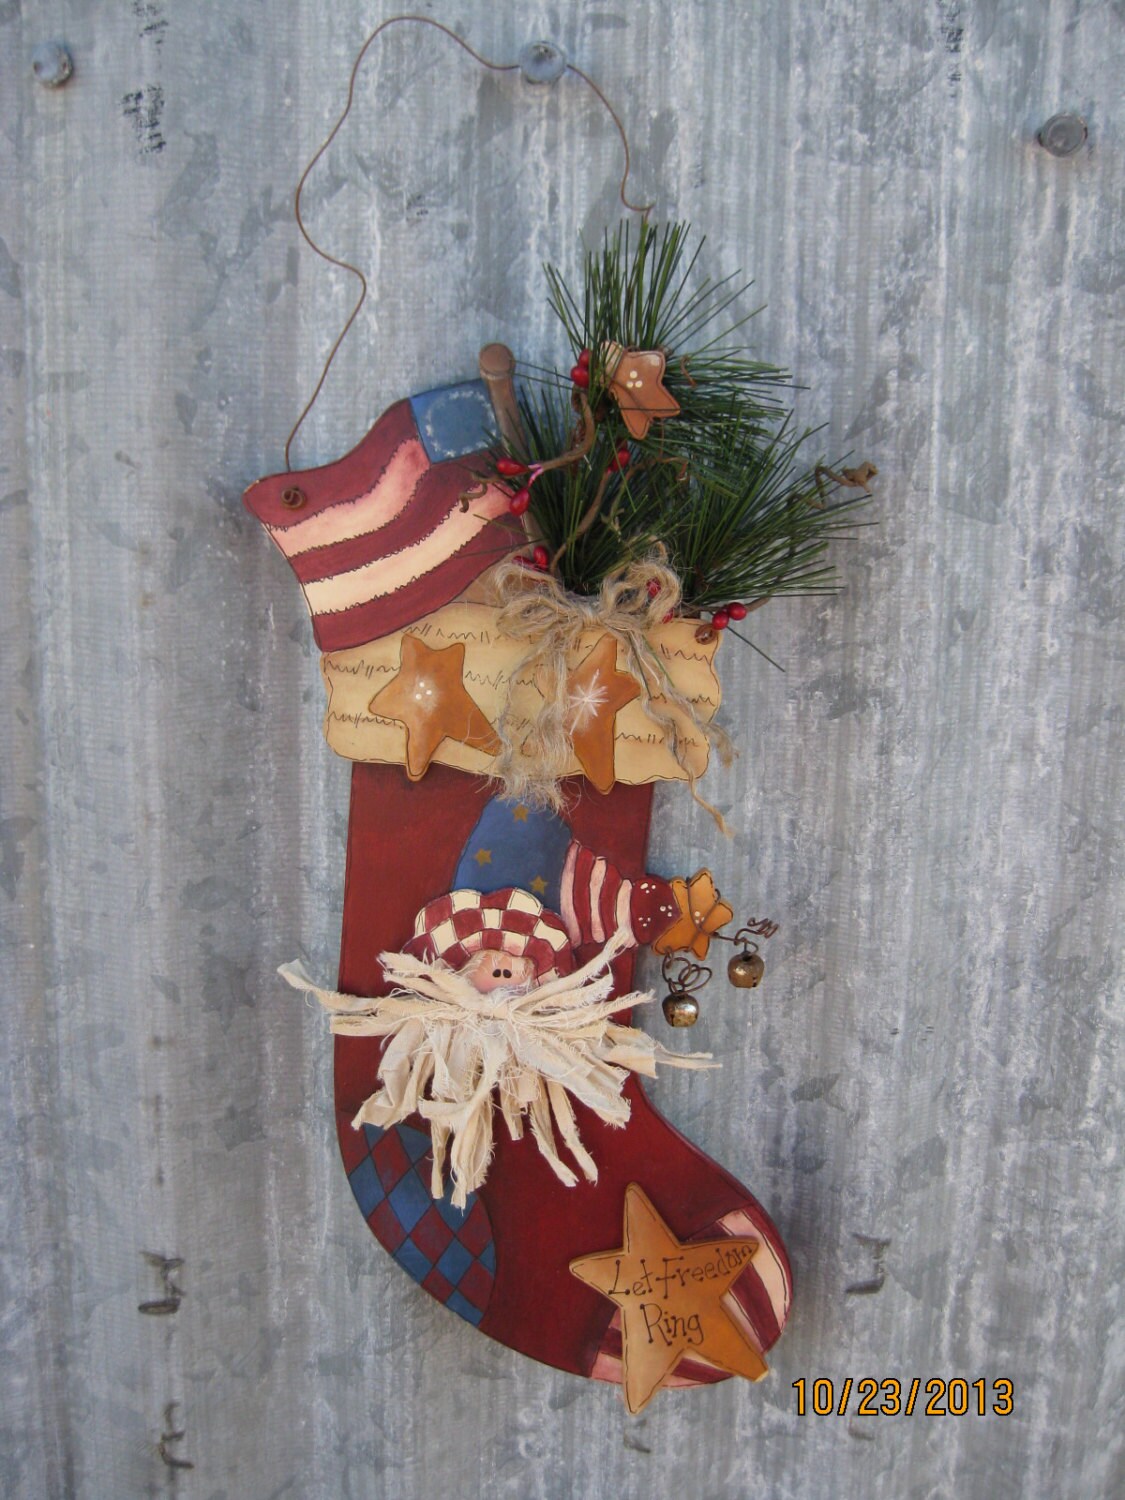 Santa Stocking "Let Freedom Ring" made in the USA